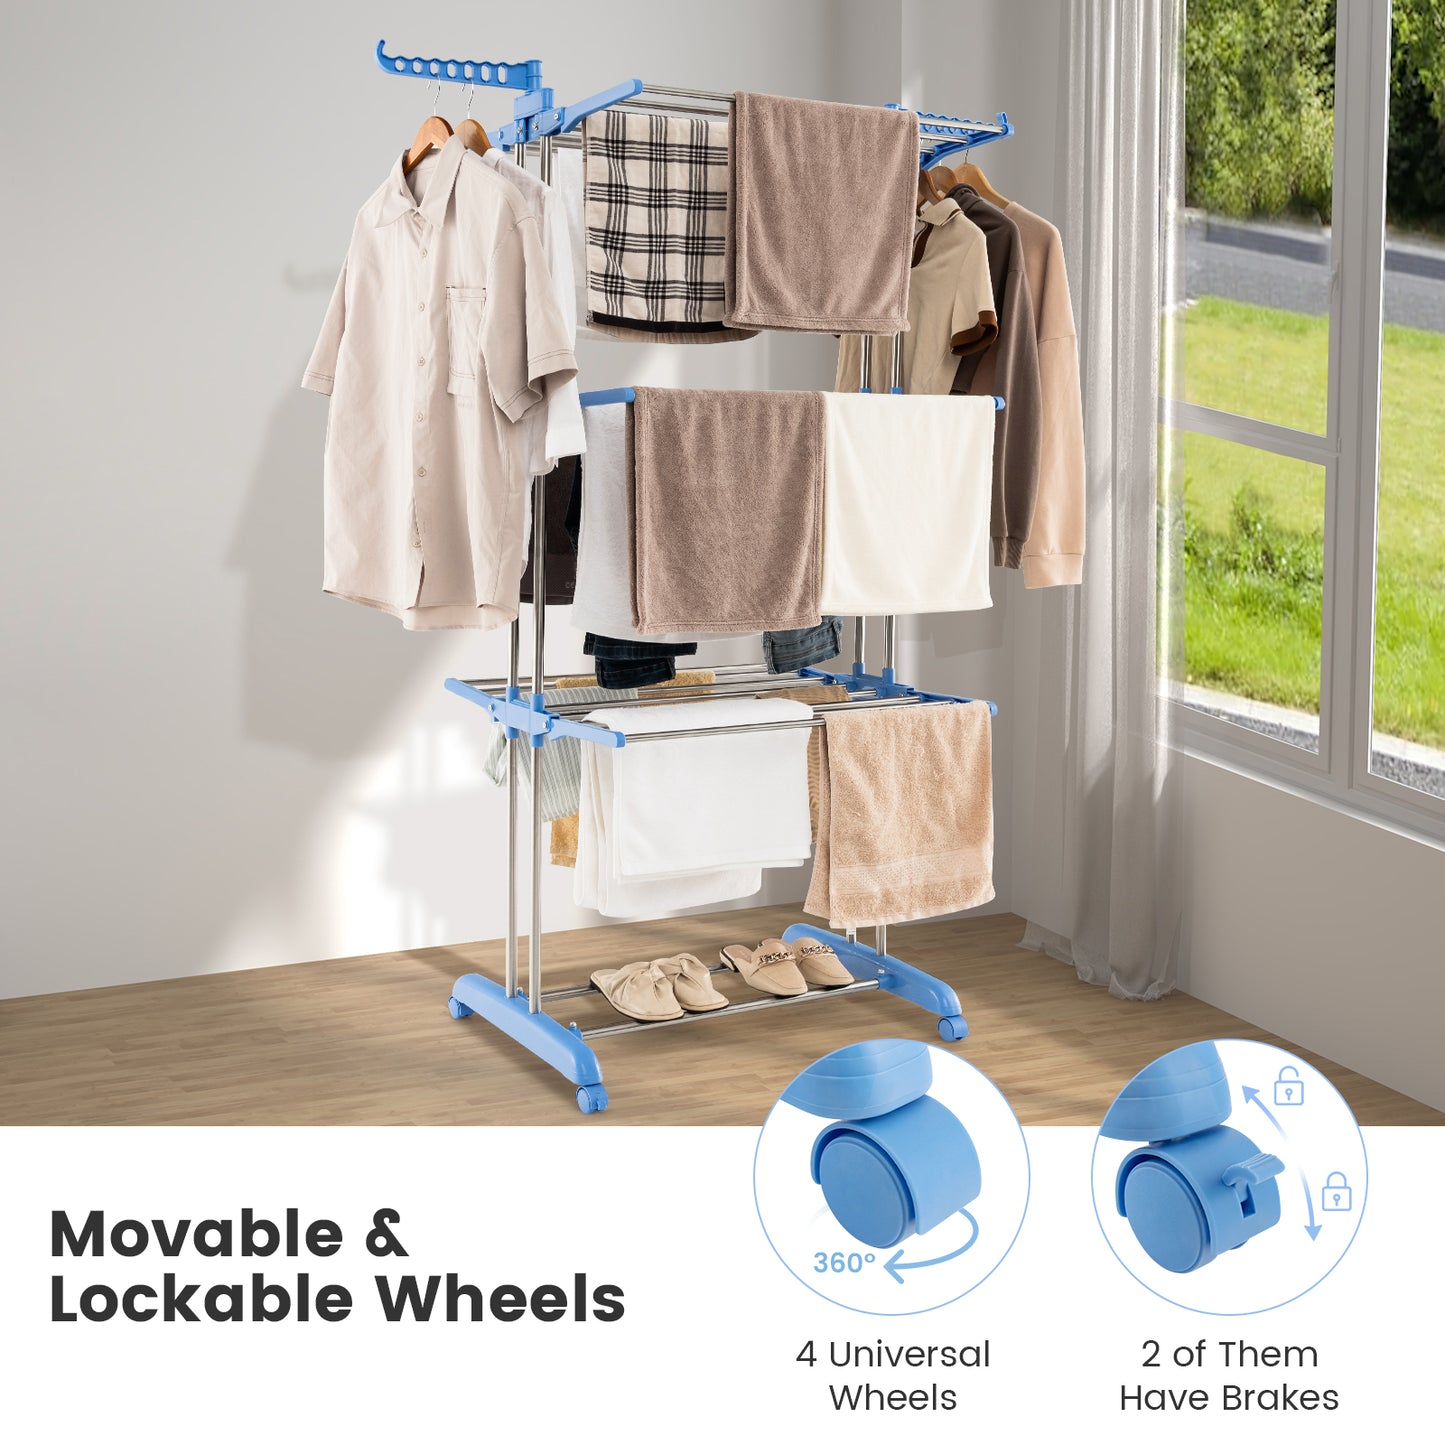 4-tier Folding Clothes Drying Rack with Rotatable Side Wings - Gallery Canada